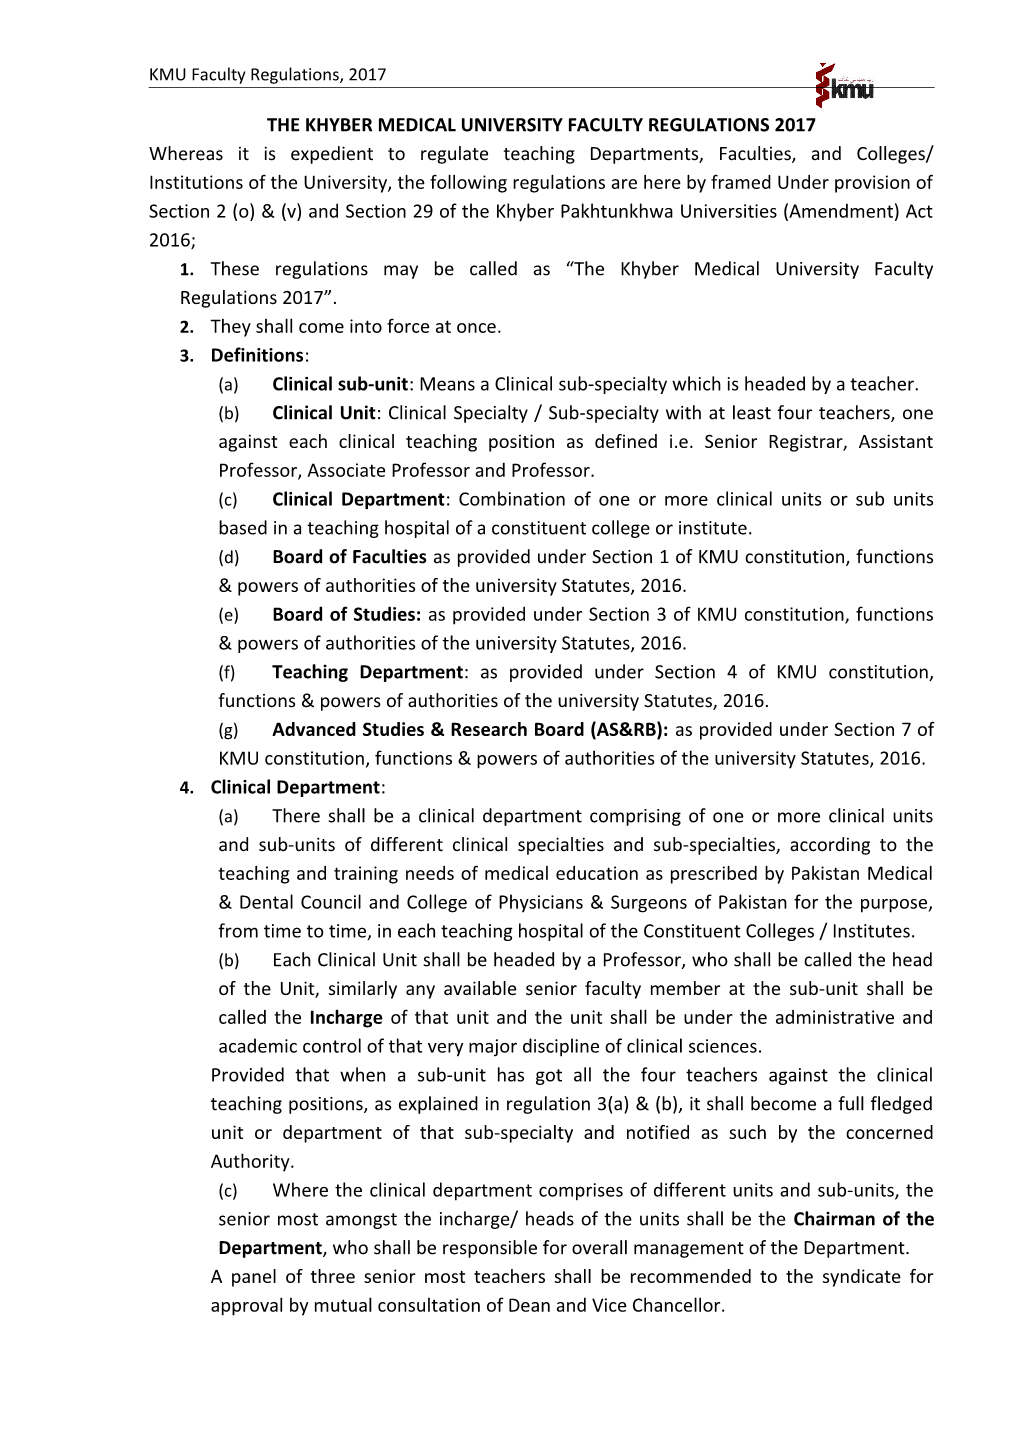 The Khyber Medical University Faculty Regulations 2017